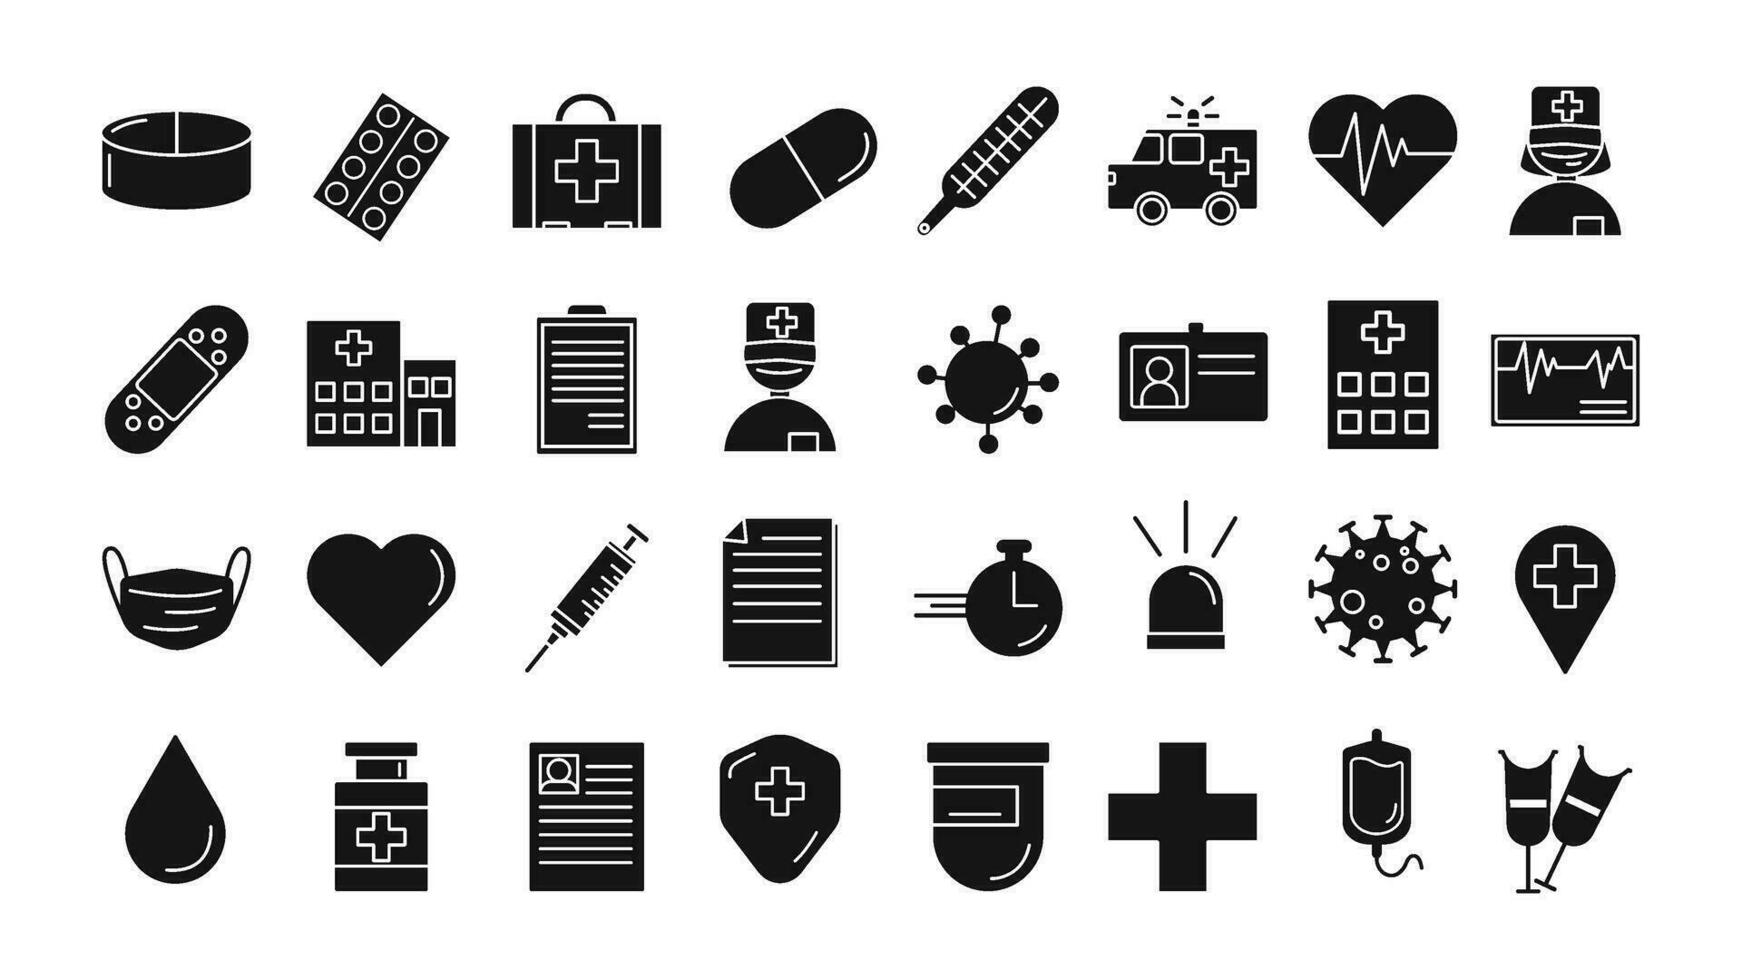 Medicine Vector Icons. Solid Icons, Sign and Symbols. Medicine and Health Care with Elements for Mobile Concepts and Web Apps. Collection Modern Infographic